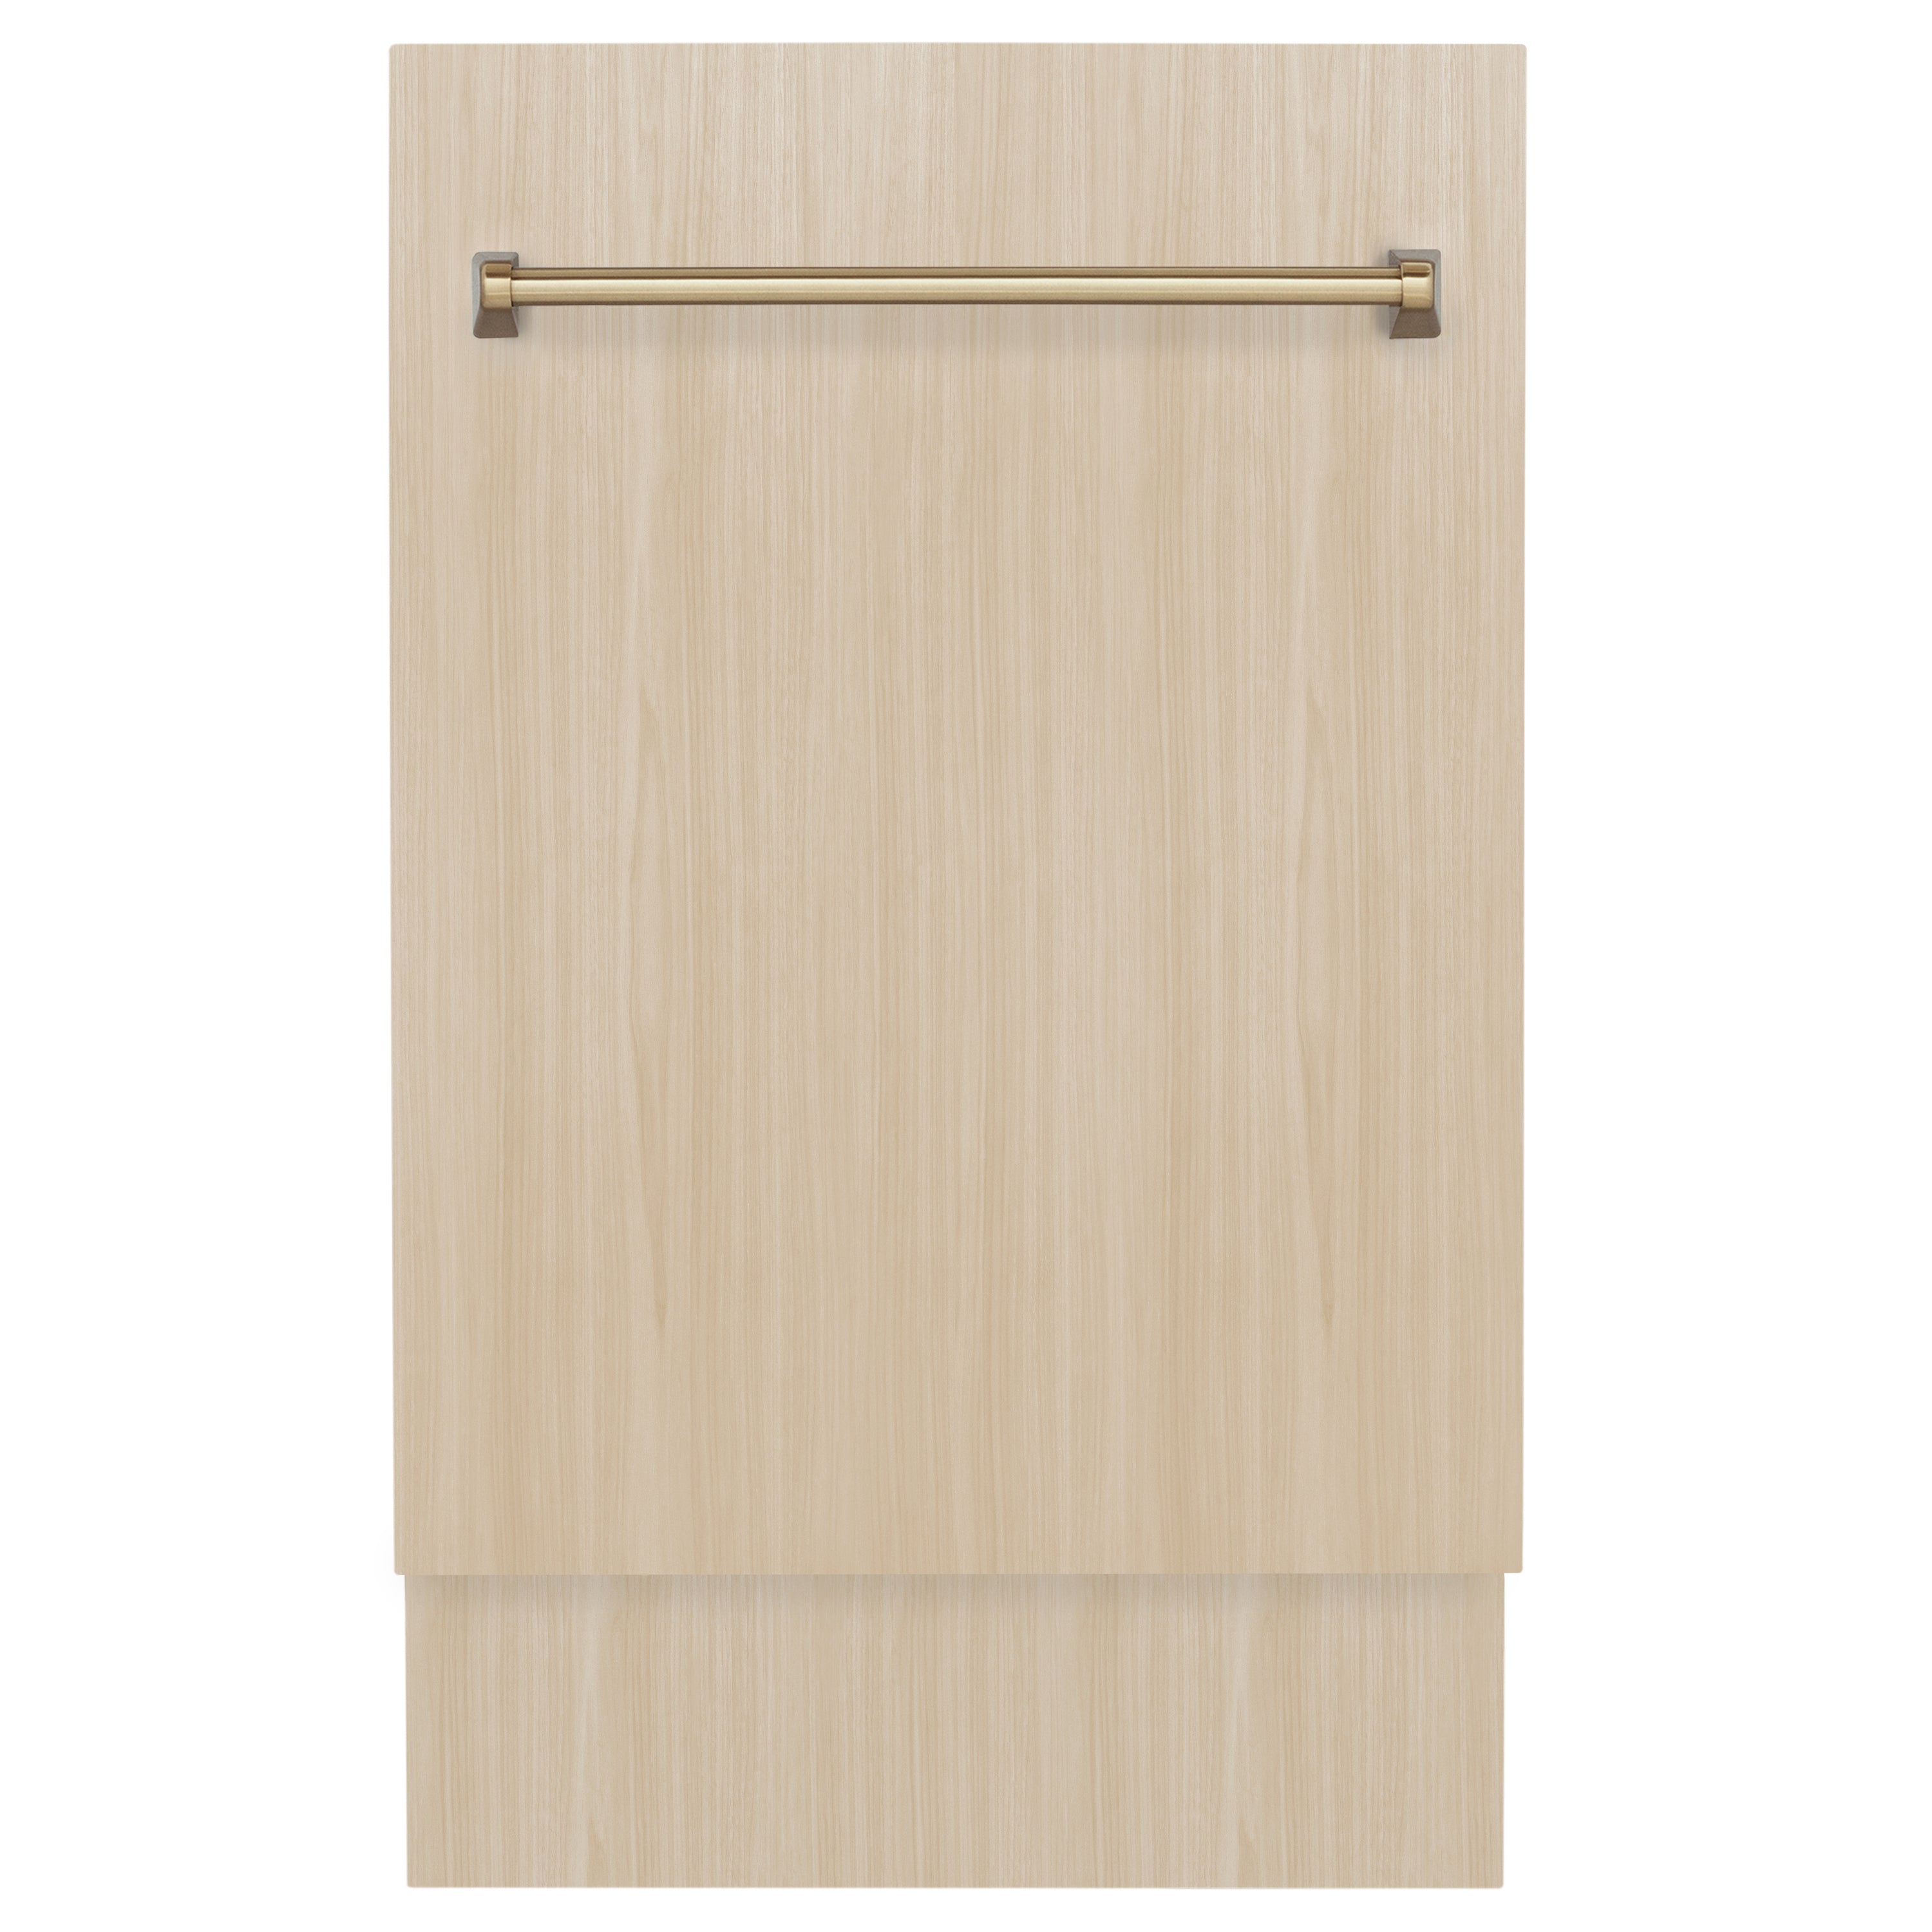 ZLINE Autograph Edition 18‚Äù Tallac Series 3rd Rack Top Control Dishwasher in Custom Panel Ready with Champagne Bronze Handle, 51dBa (DWVZ-18-CB)